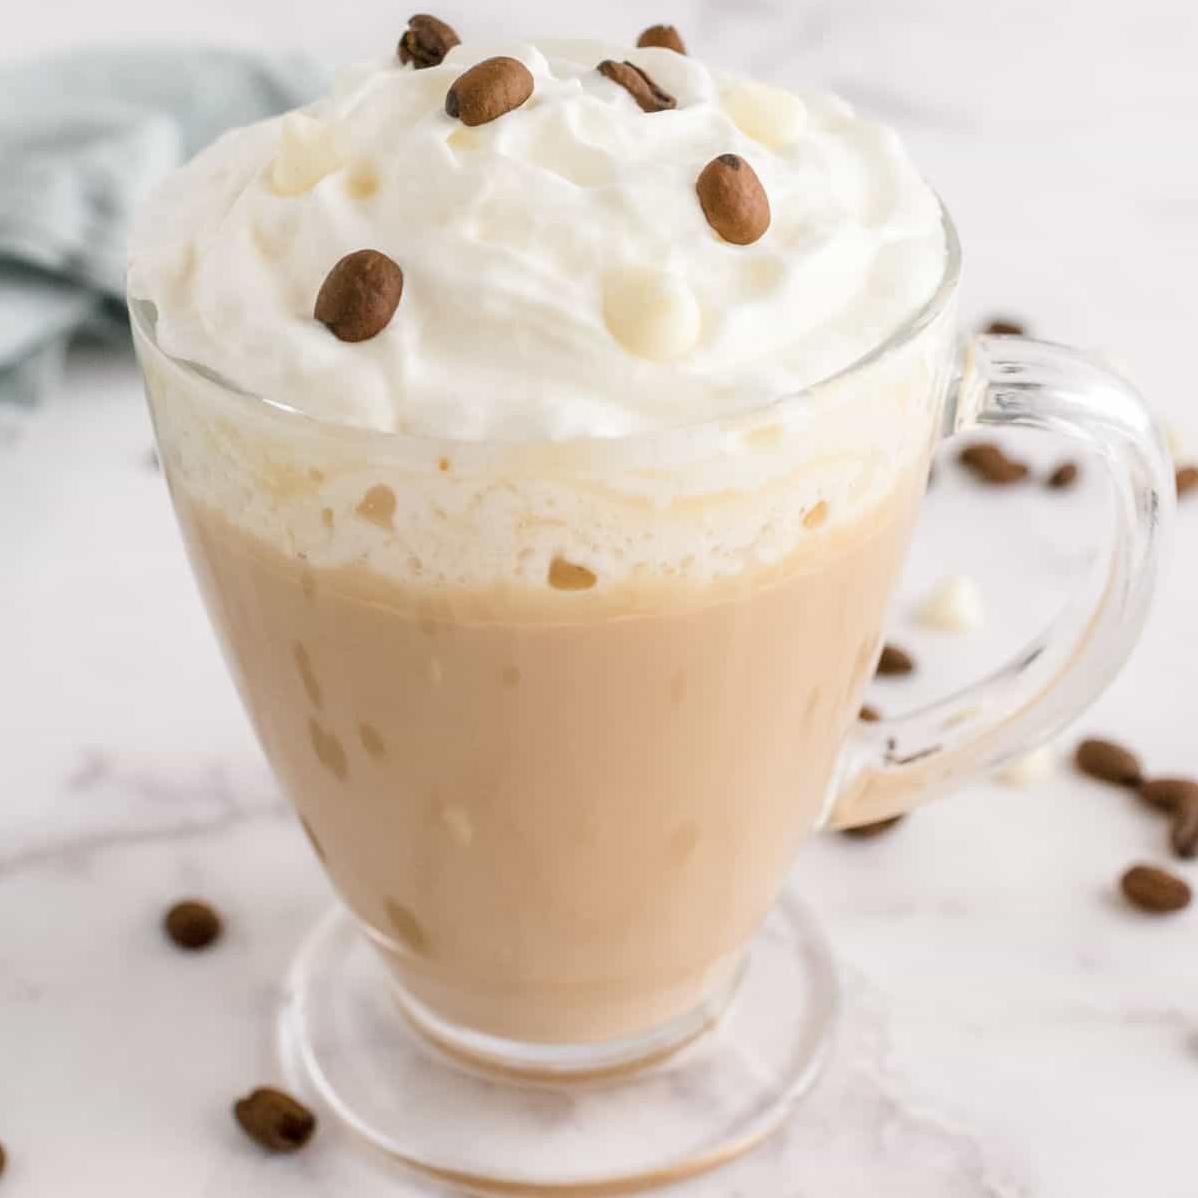  Sweet and creamy, our white chocolate latte is the ultimate indulgence!